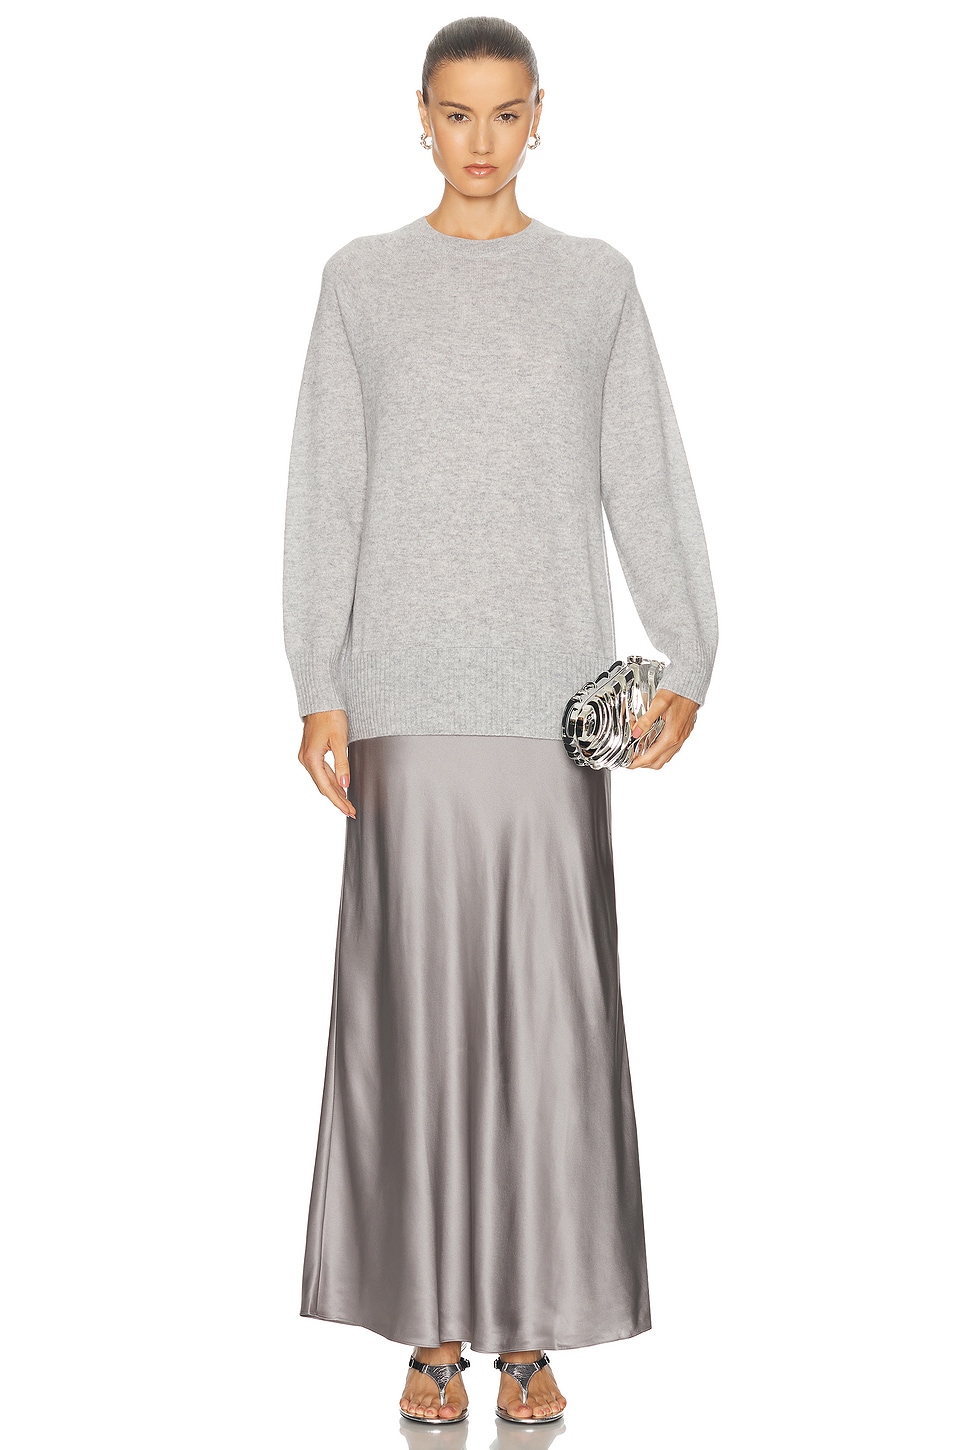 Monument Long Dress in Grey